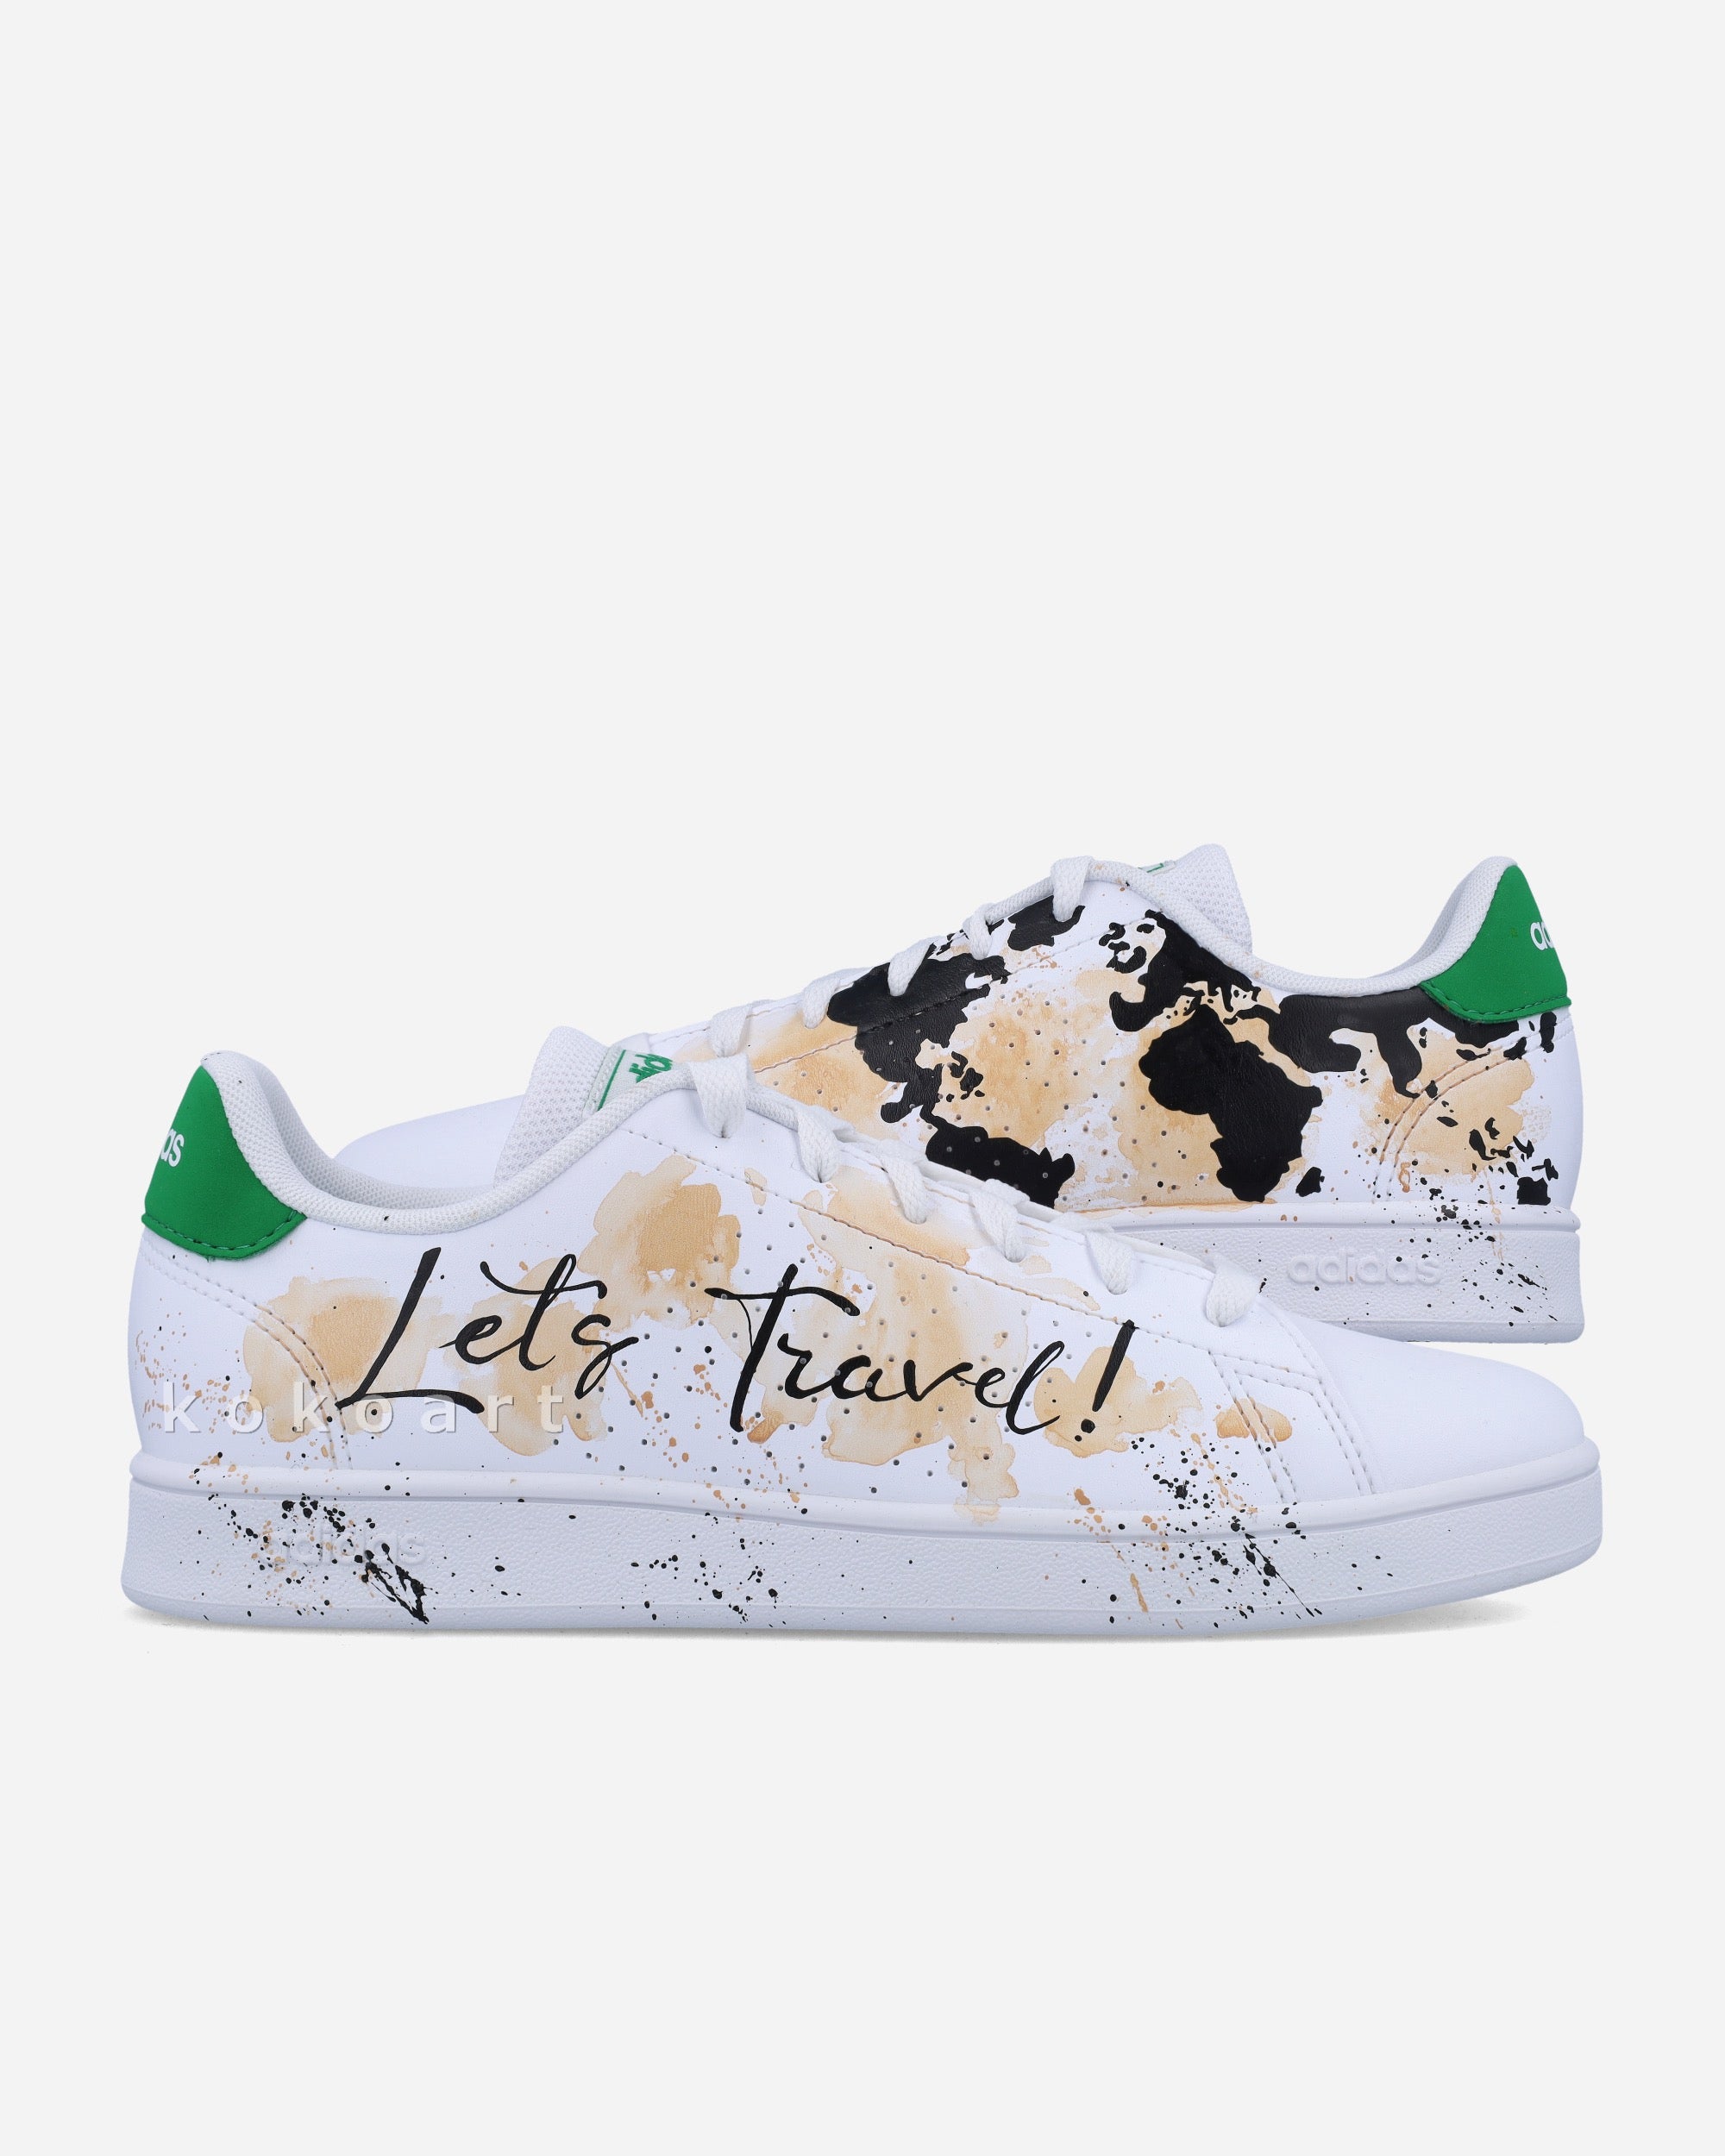 Adidas Hand Painted Let's Travel